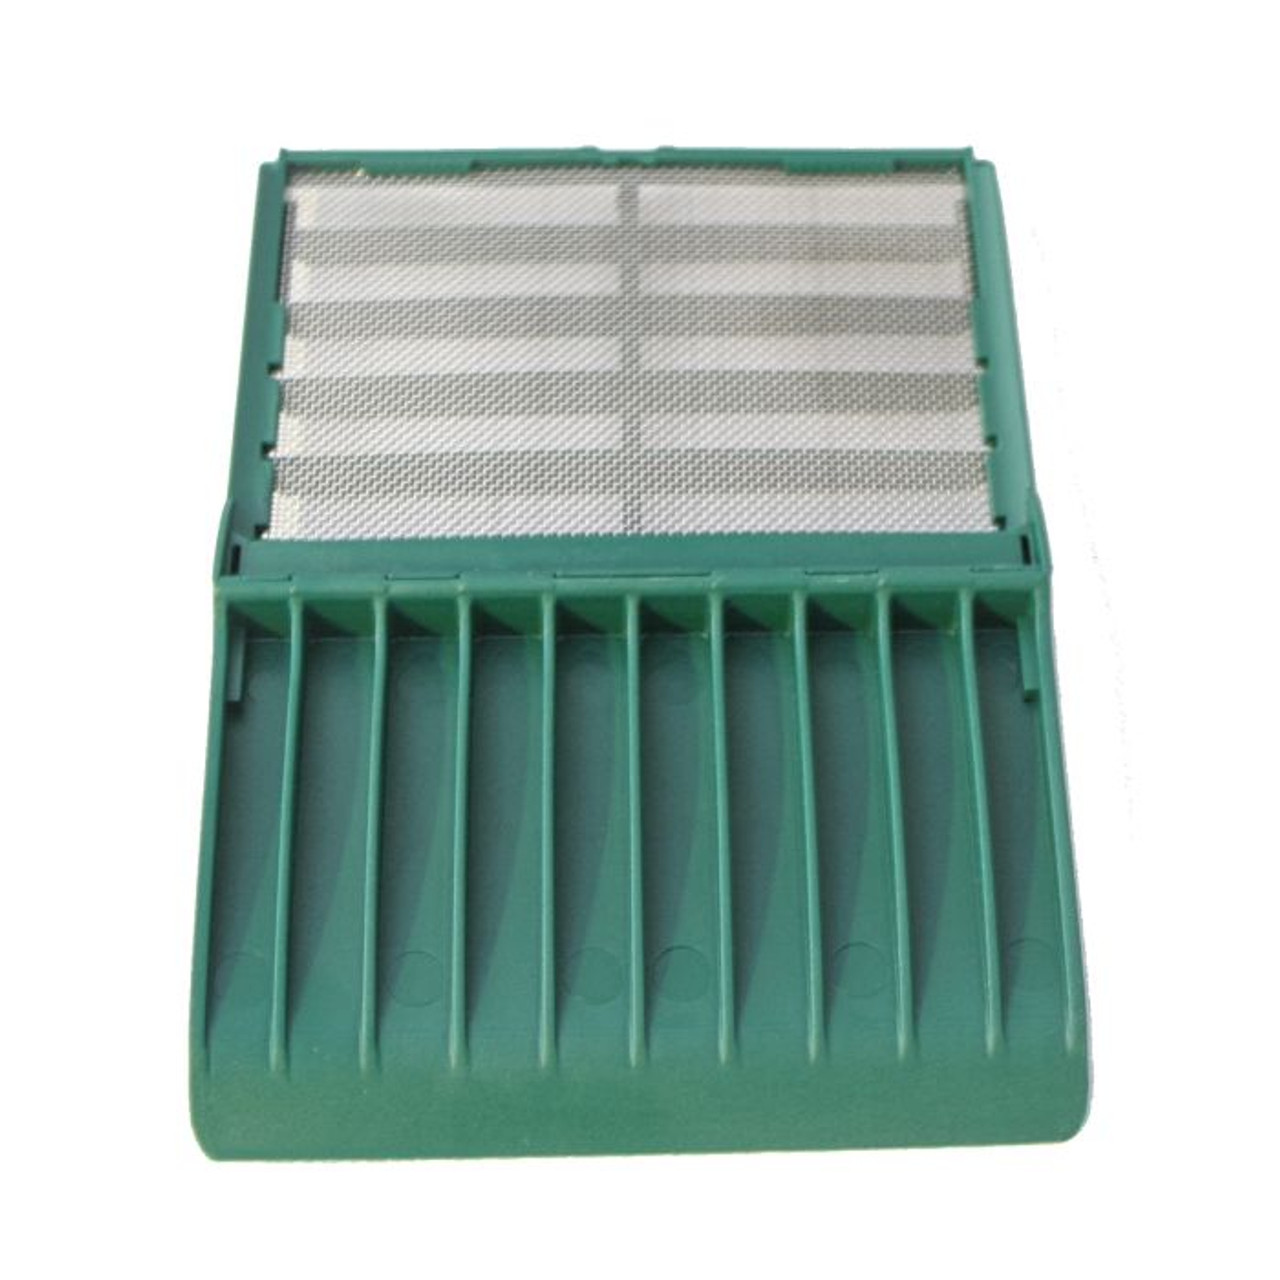 The removable stainless steel mesh filter.